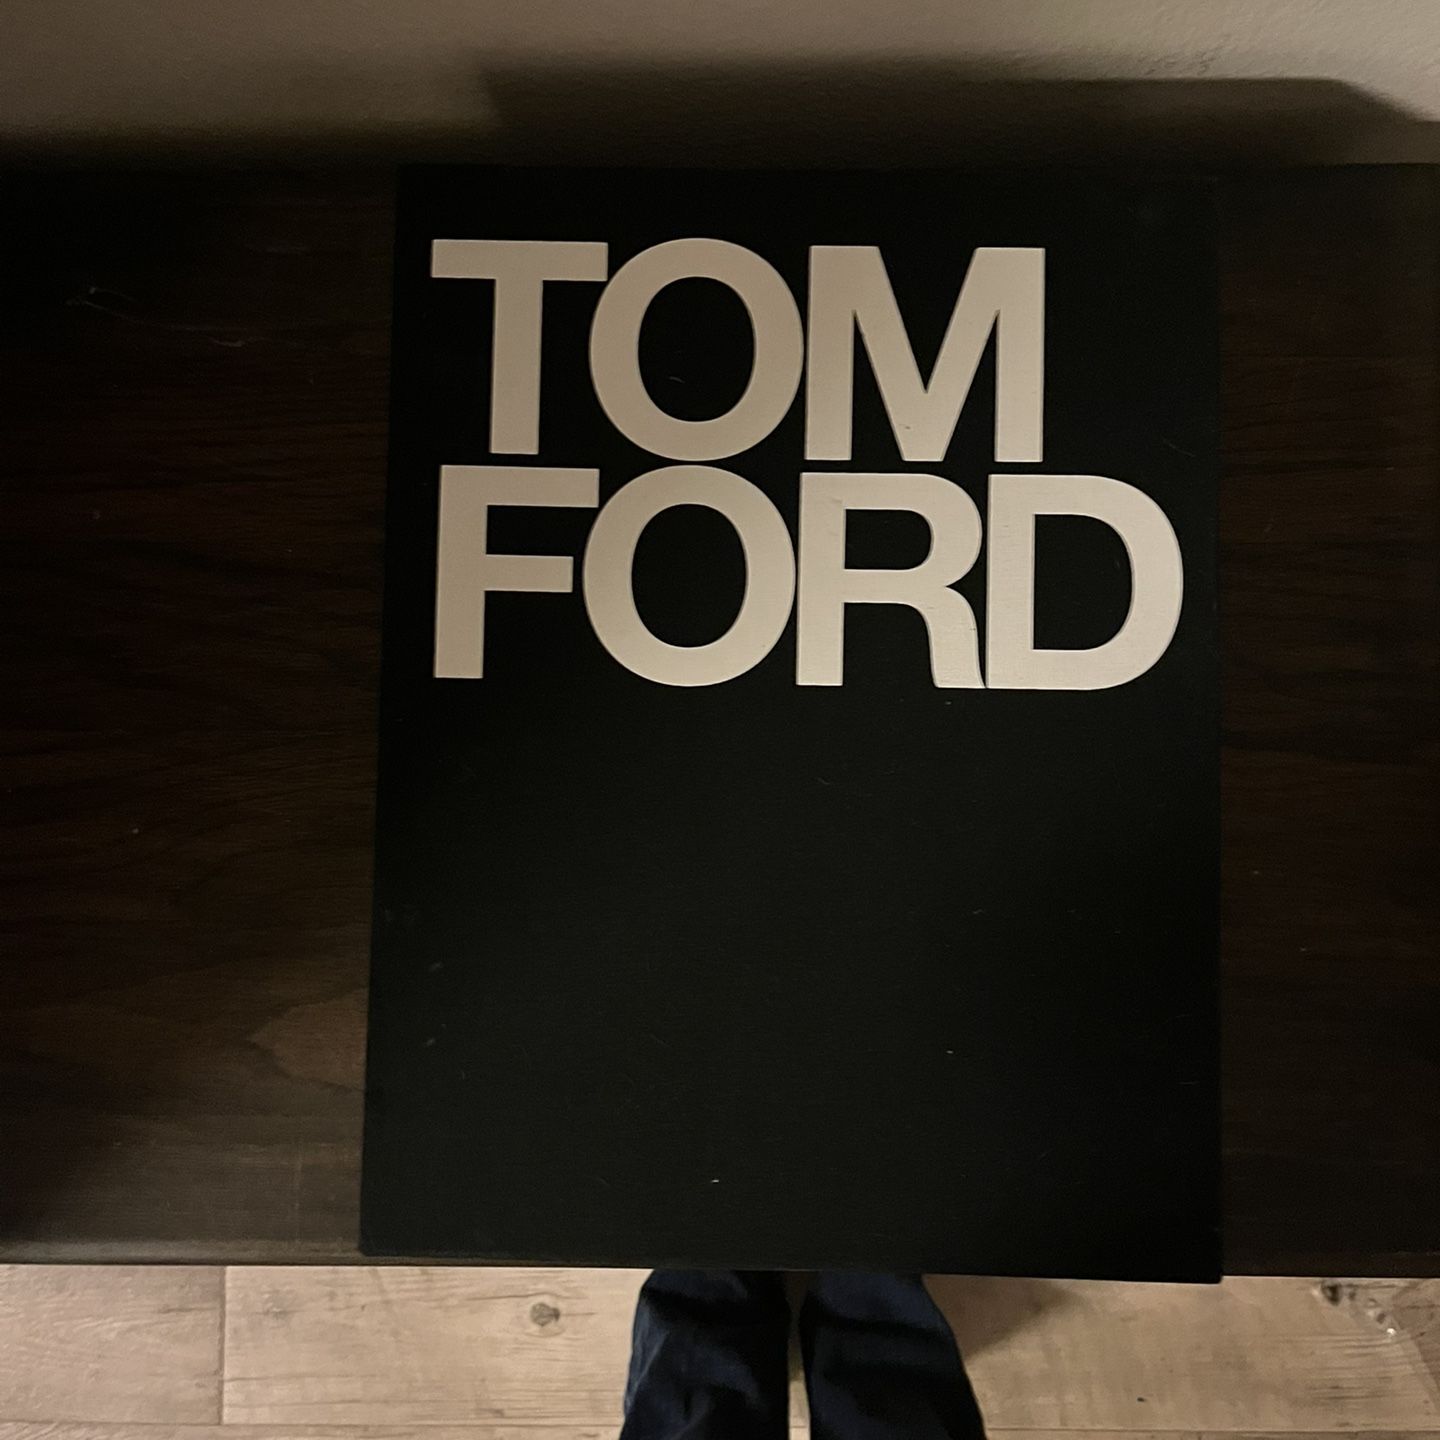 Tom Ford Coffee Table Book for Sale in Alexandria, VA - OfferUp